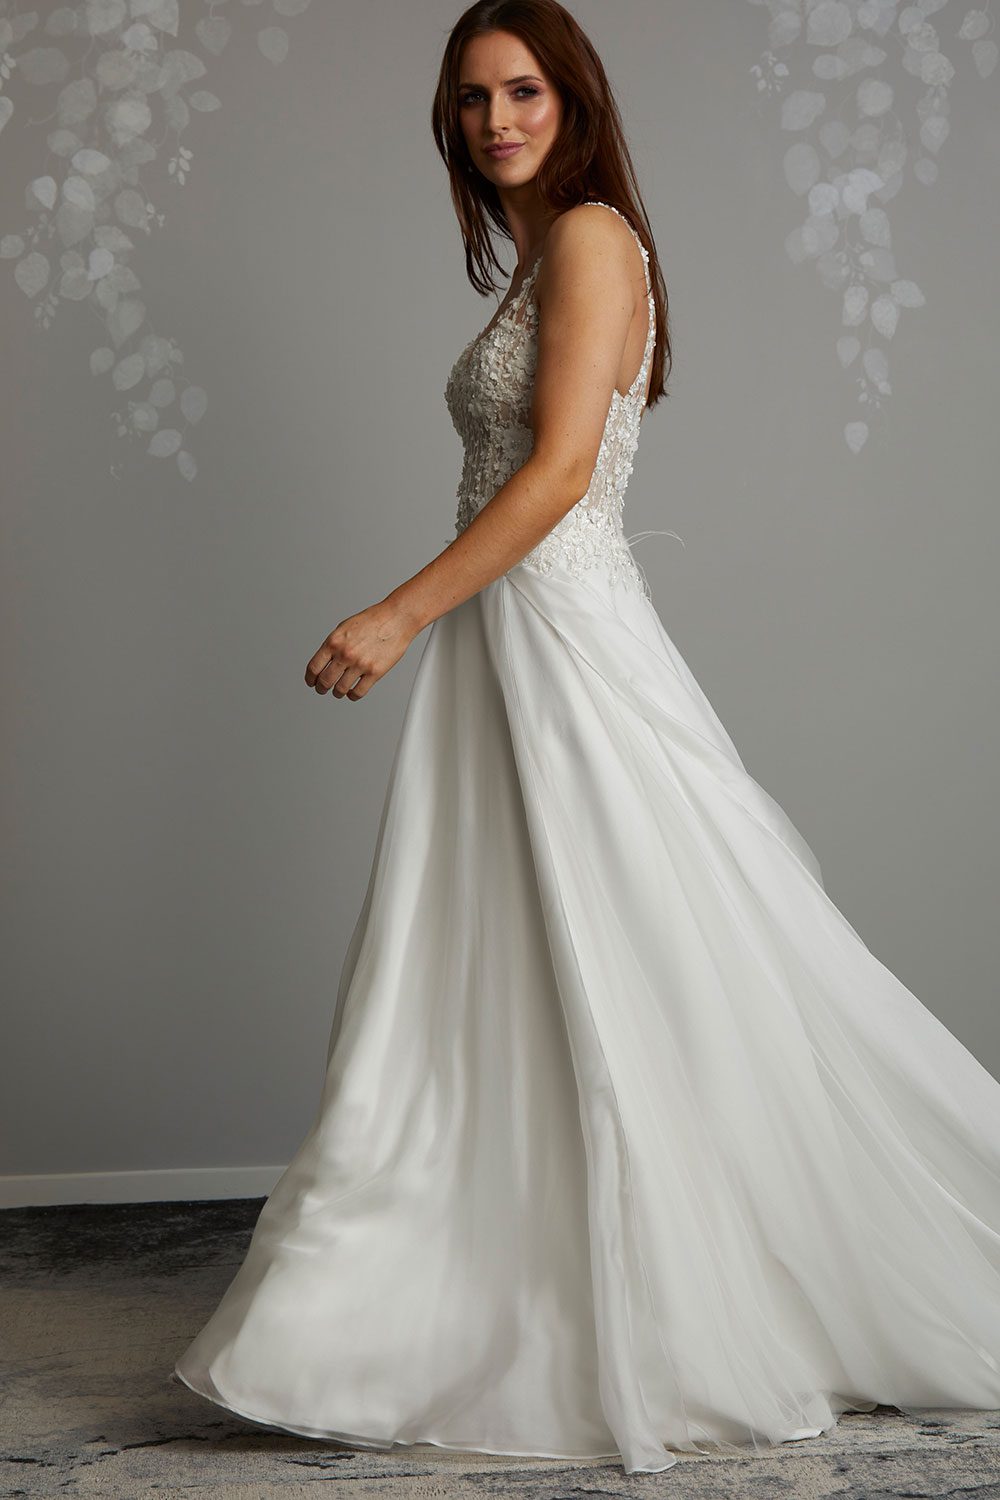 Iris Wedding Dress from Vinka Design. Soft and feminine, this gown has beautiful movement, with the silk chiffon making the design very light and fluid. The boned bodice is semi-sheer and is highlighted by delicate 3-D beaded flower lace. Profile of Model wearing silk chiffon gown with 3D floral lace